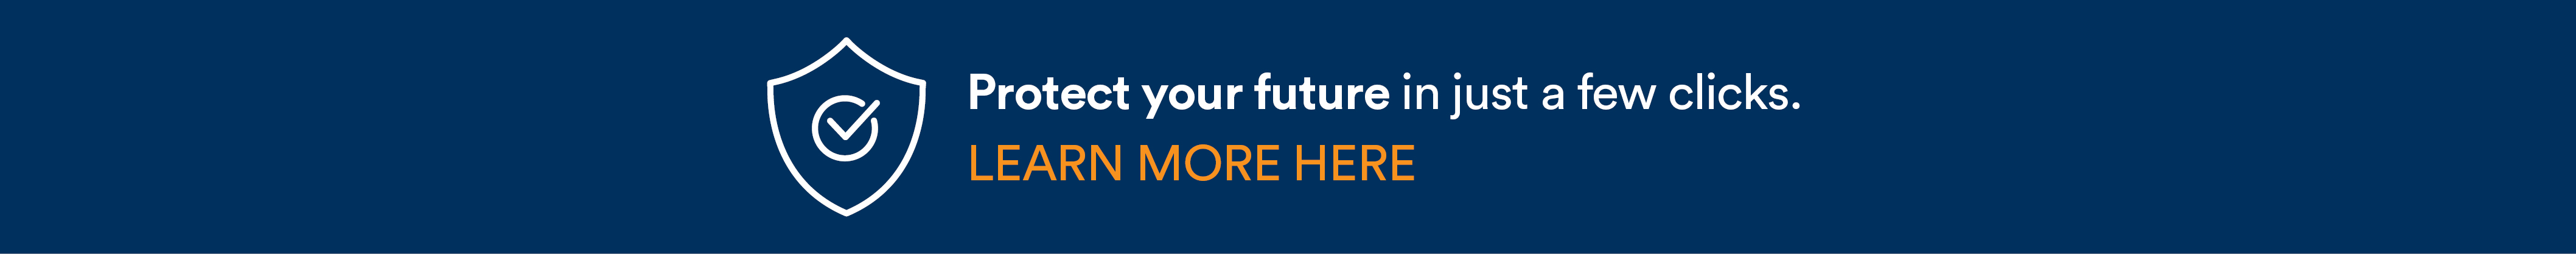 blue image with text that says Protect your future in just a few clicks. Learn more here.